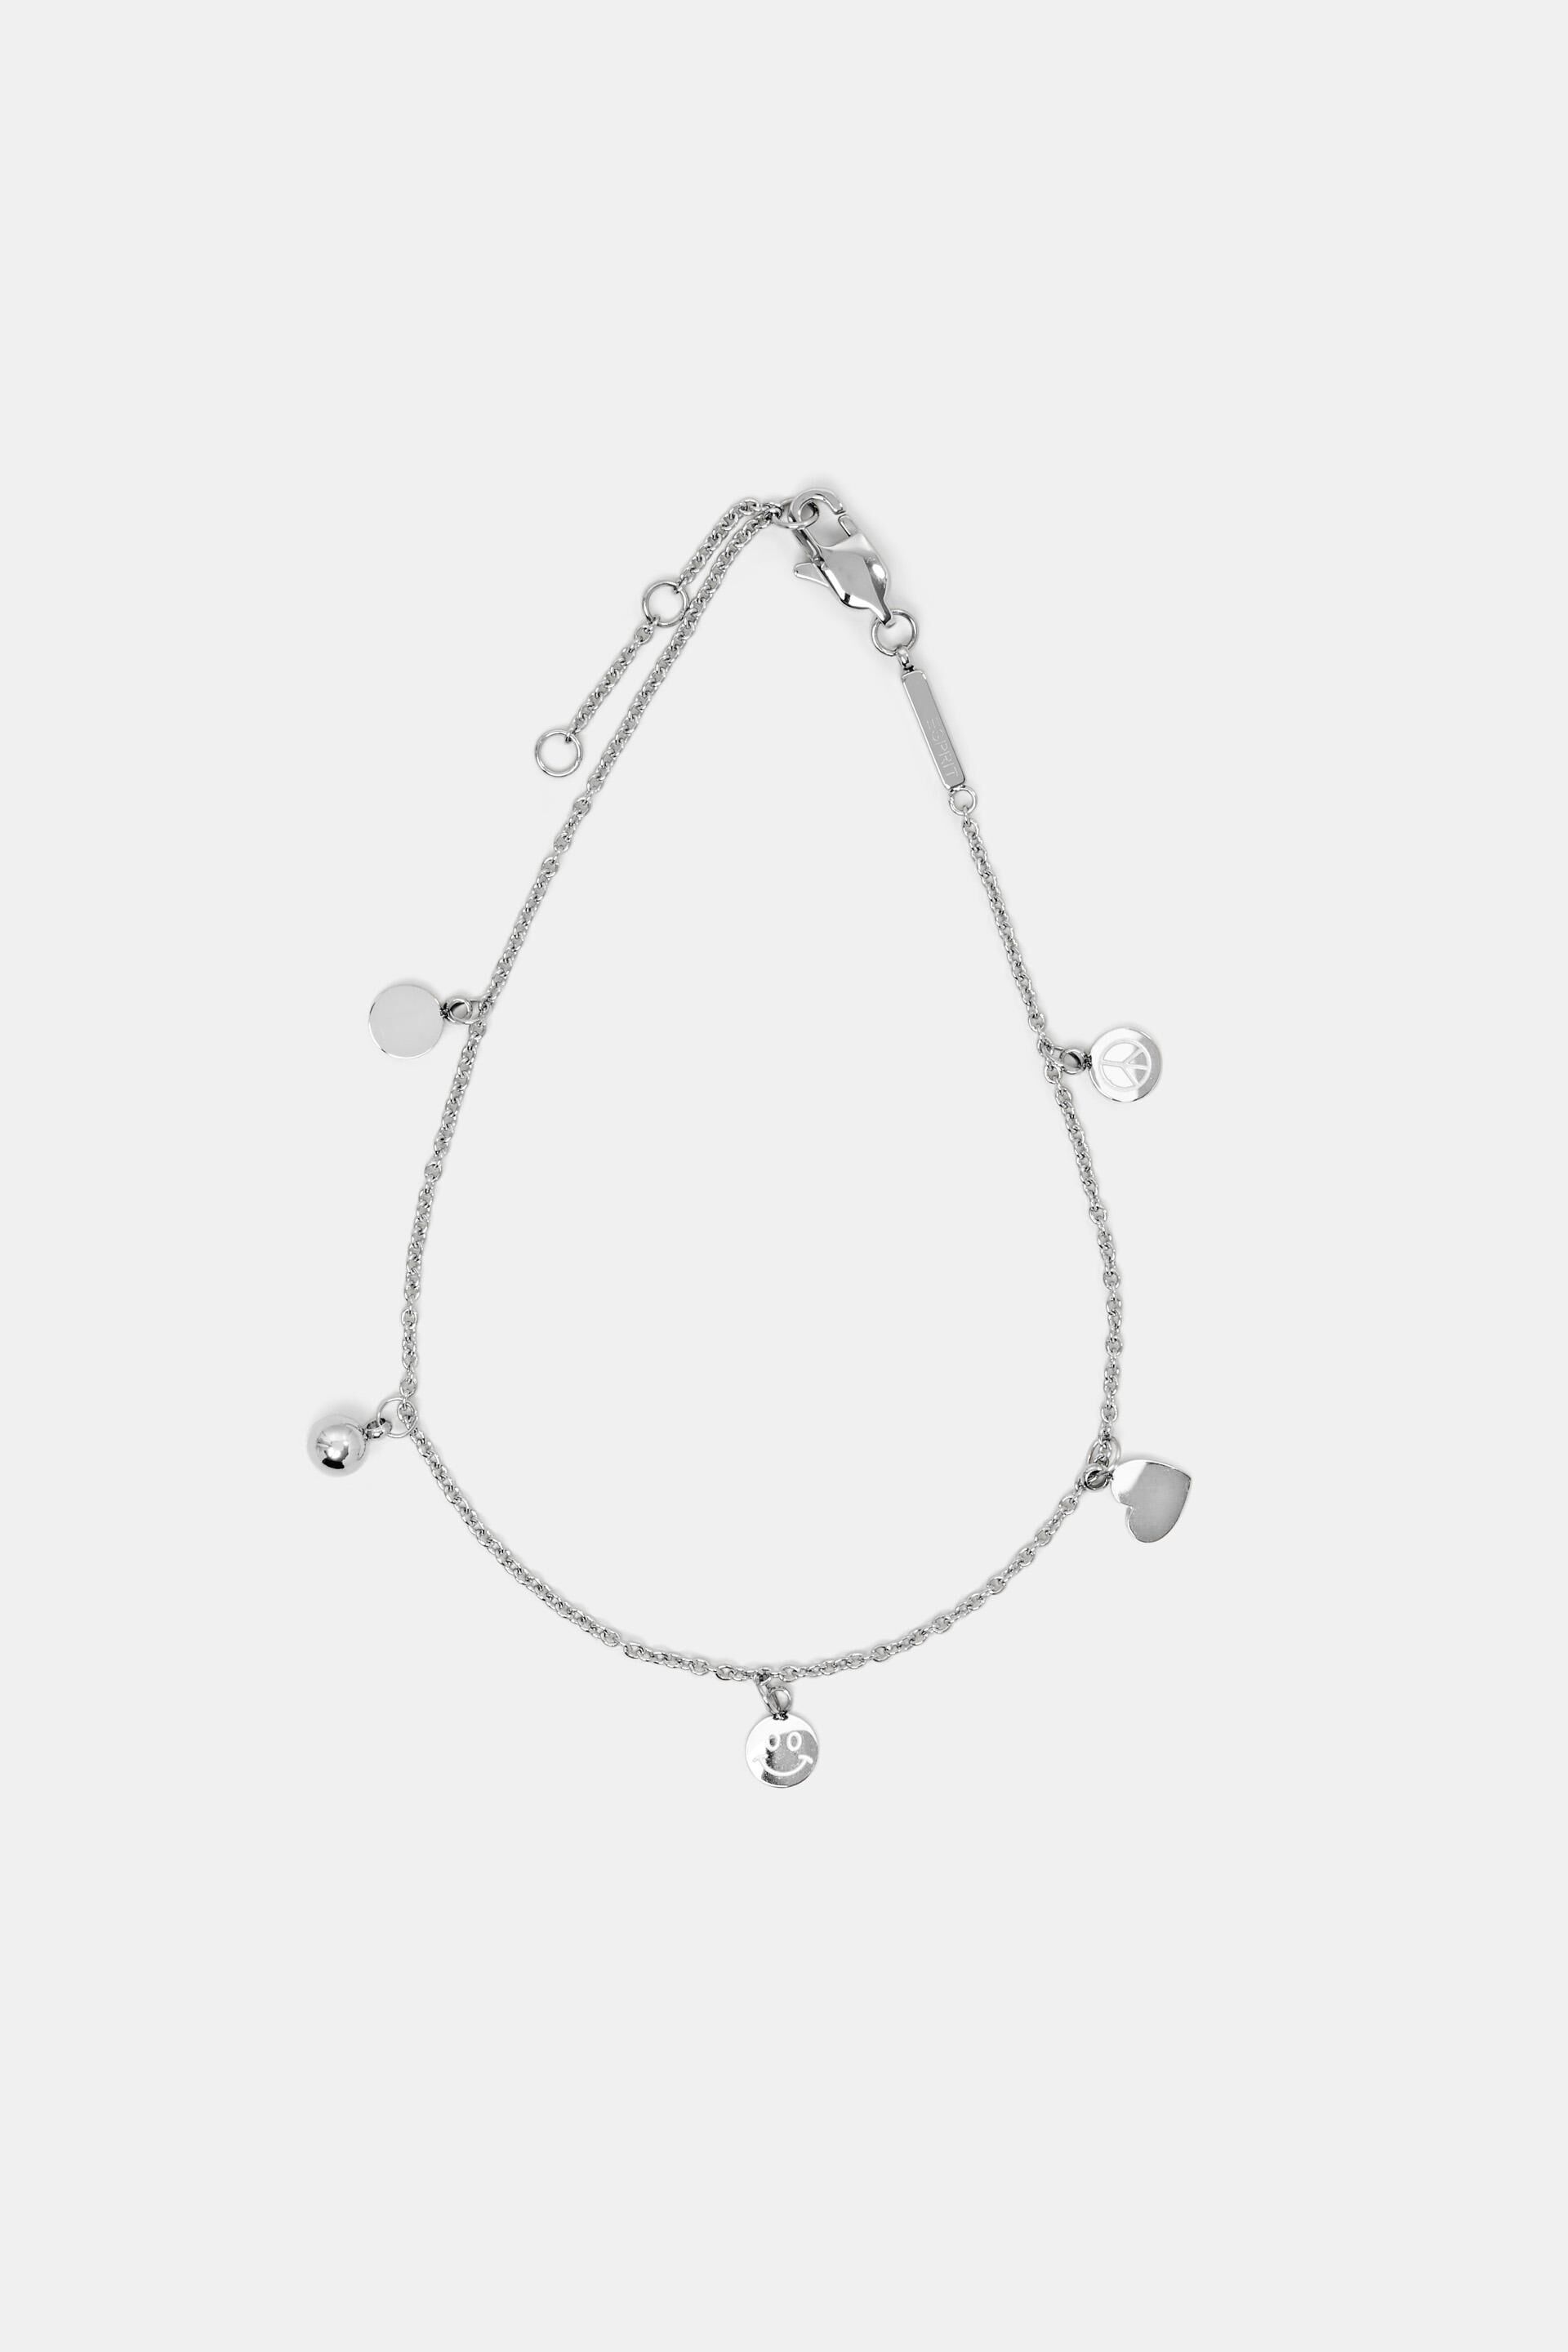 Esprit Lucky steel anklet, charms stainless